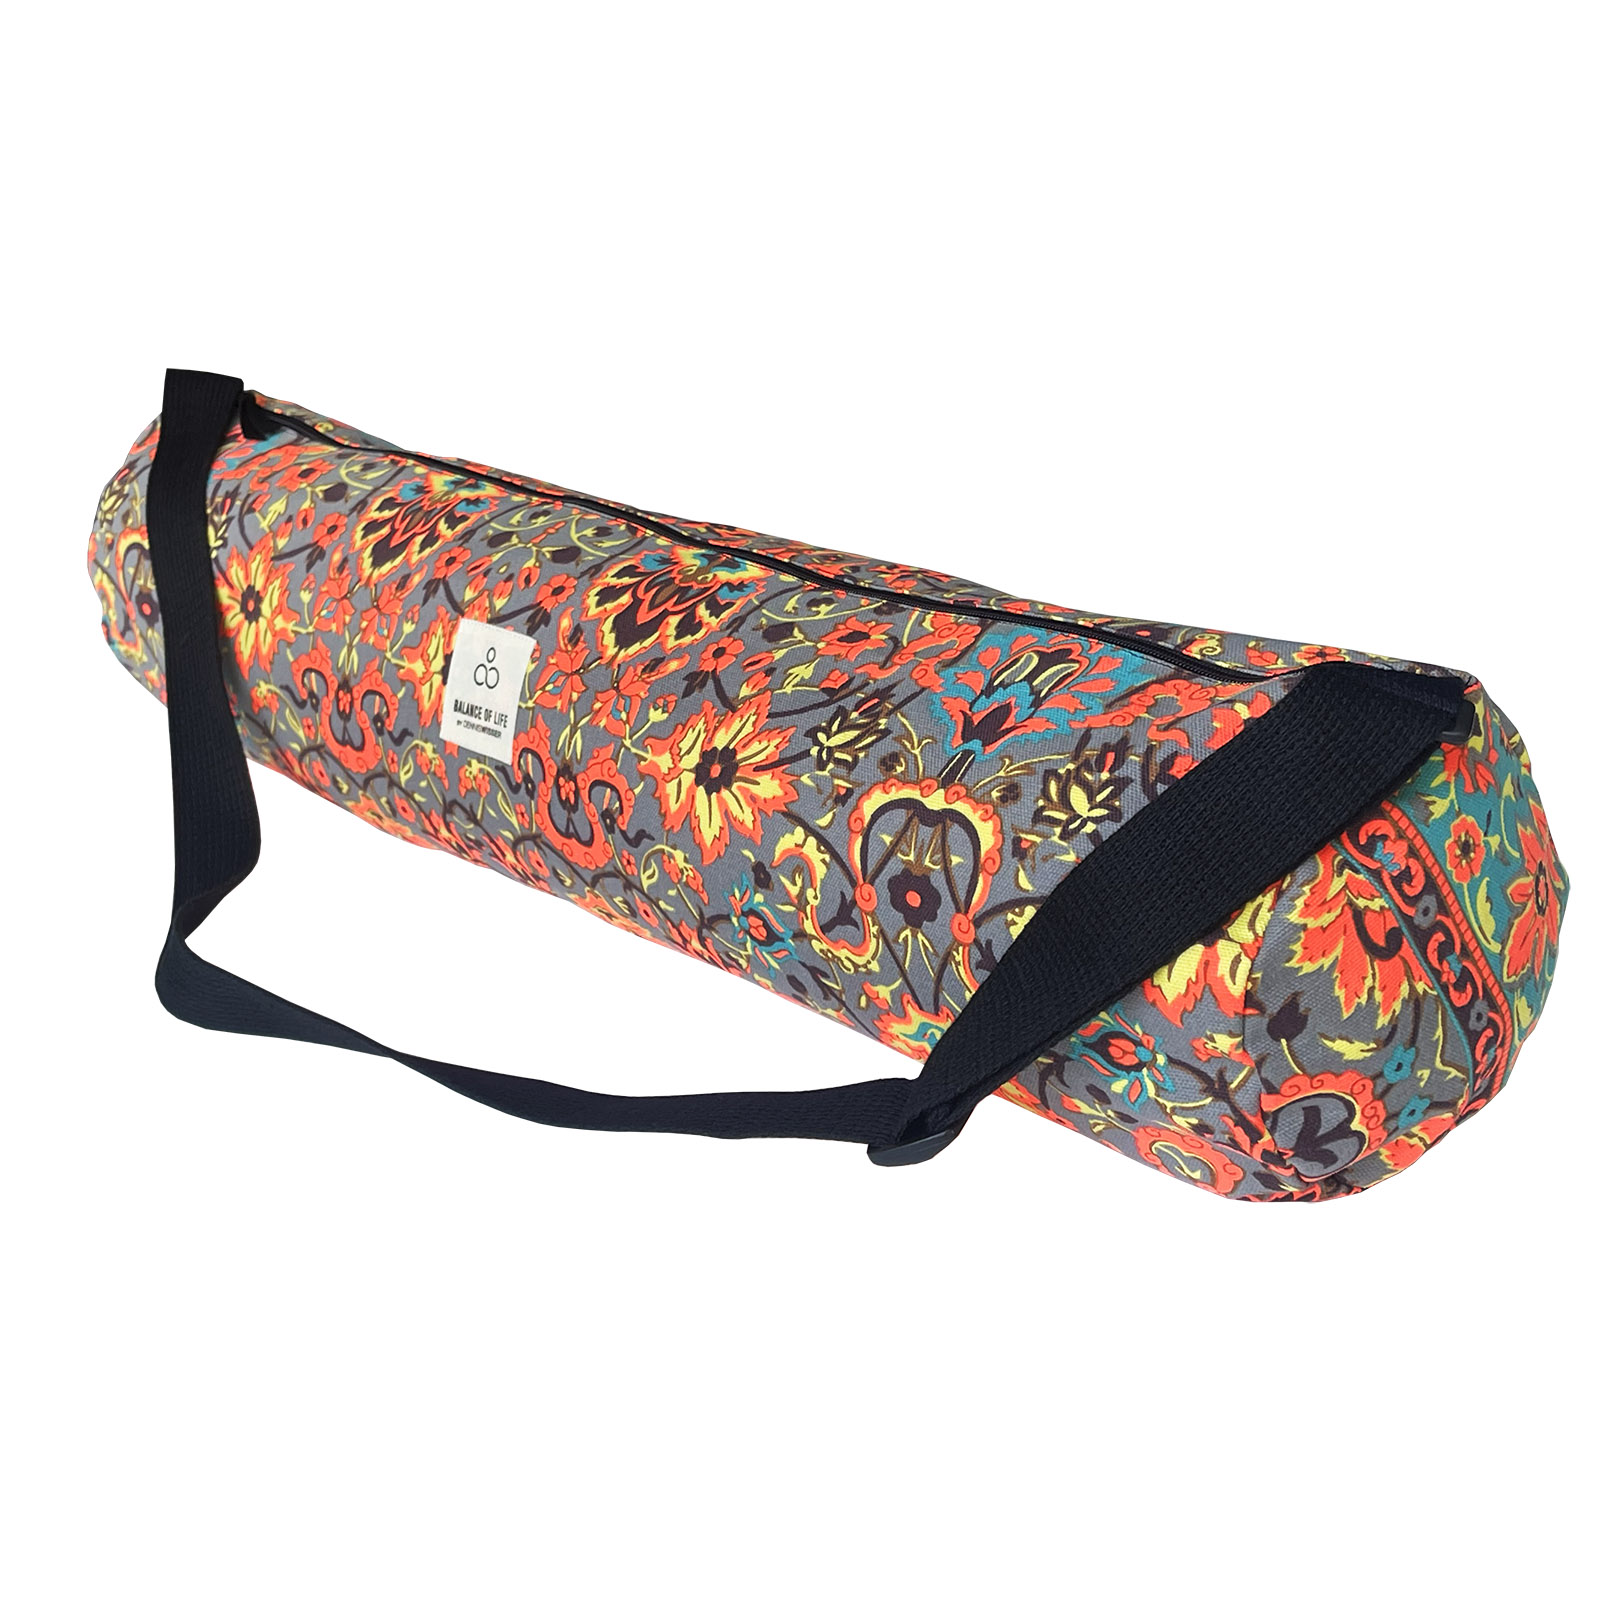 NEW Yoga Mat Bag Hippy Boho Different Designs Fully Lined Zip Pockets 